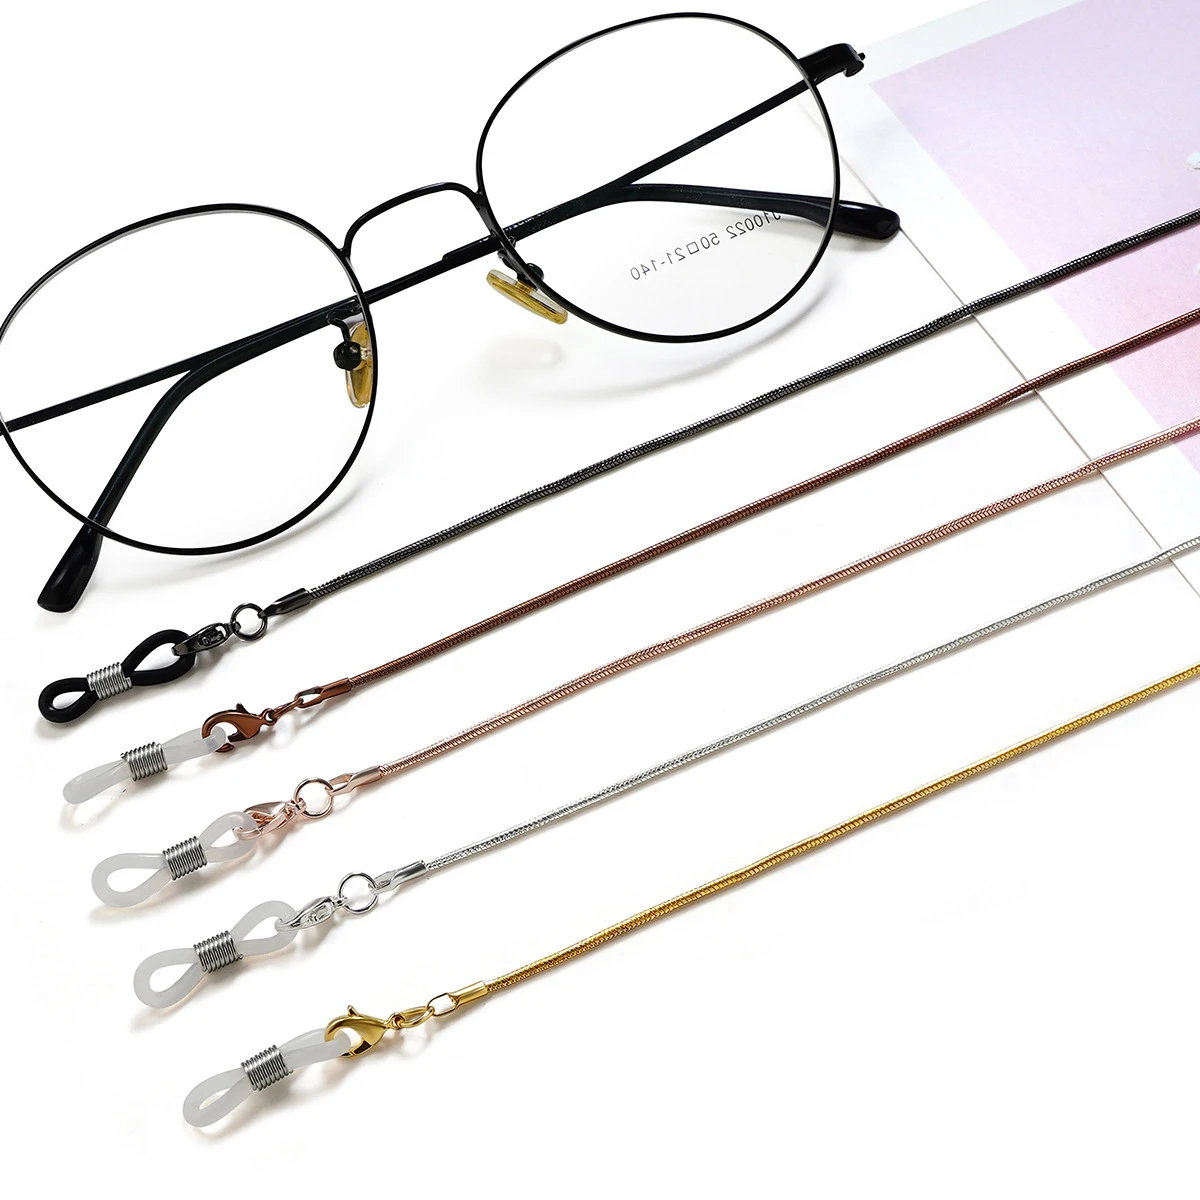 

High Qulsity Gold Stainless Copper Plated Matte Neck Cords Straps For Sunglasses Glasses Eyeglass Chains Gold String Cord, 4 color optional